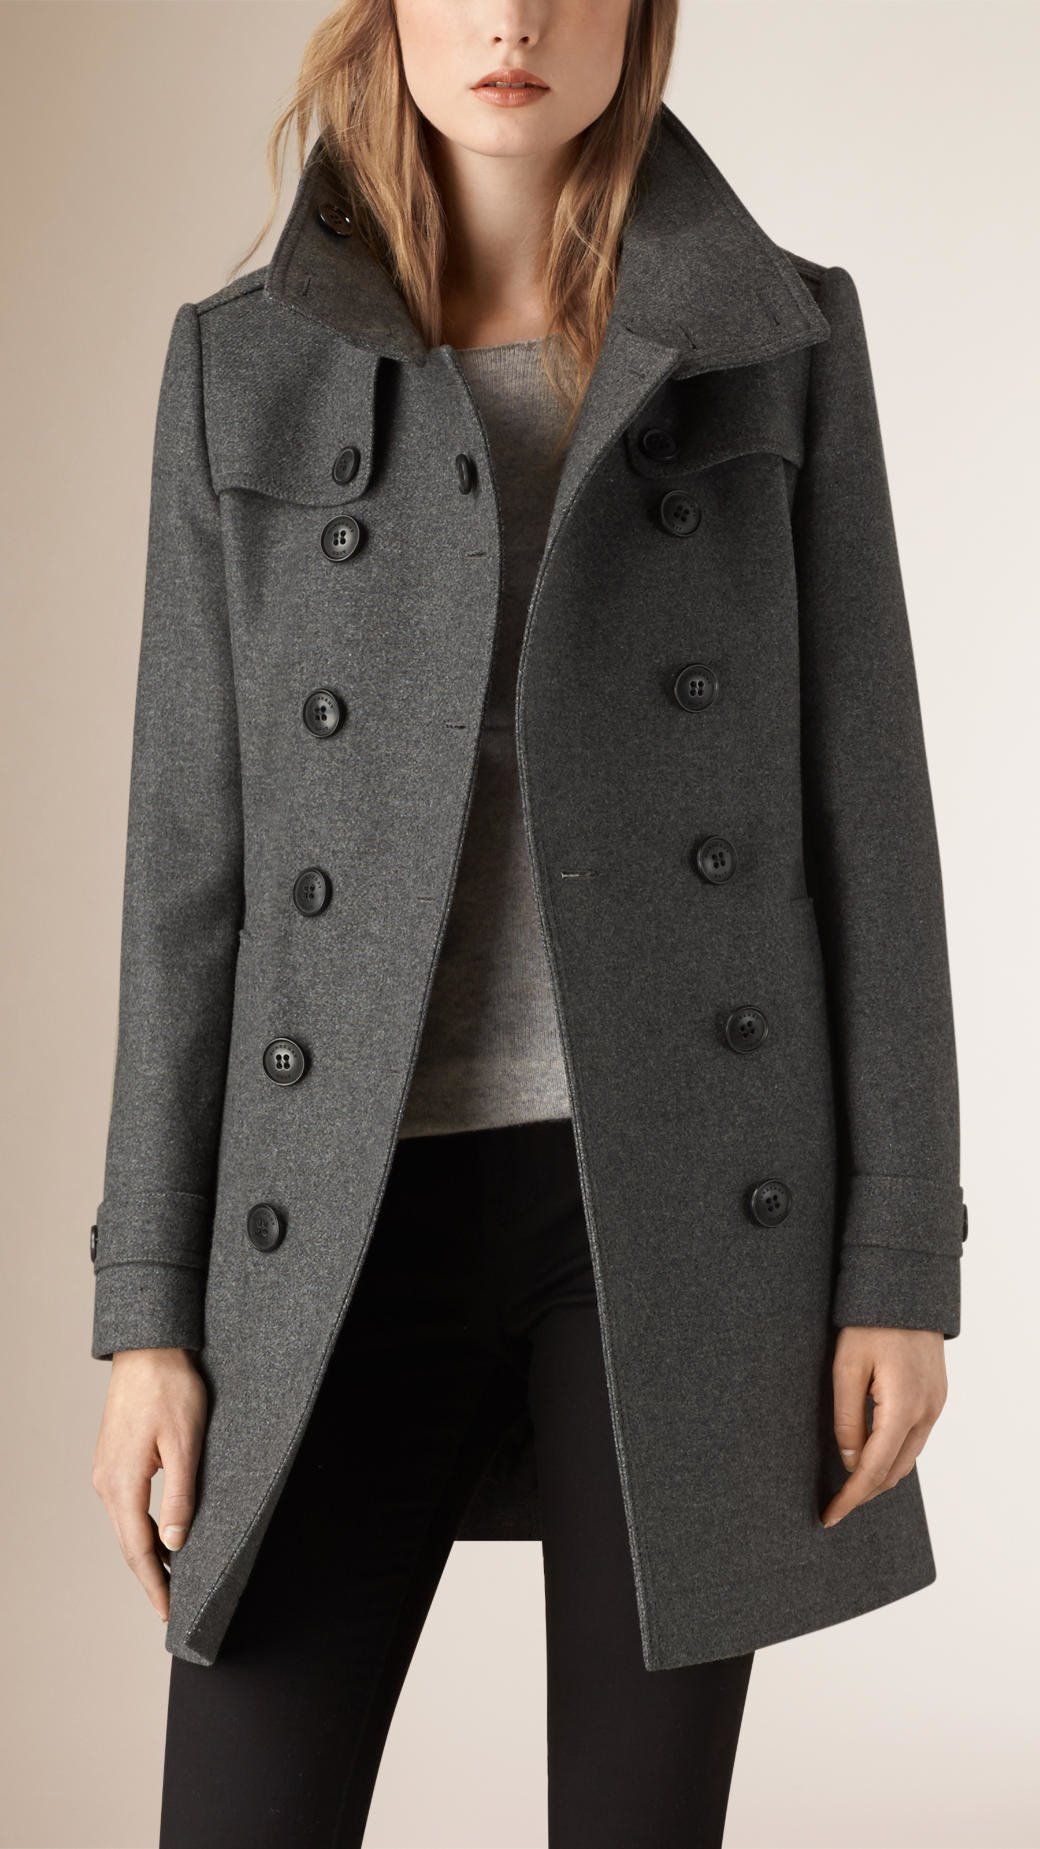 burberry wool cashmere coat Online Shopping for Women, Men, Kids Fashion &  Lifestyle|Free Delivery & Returns! -